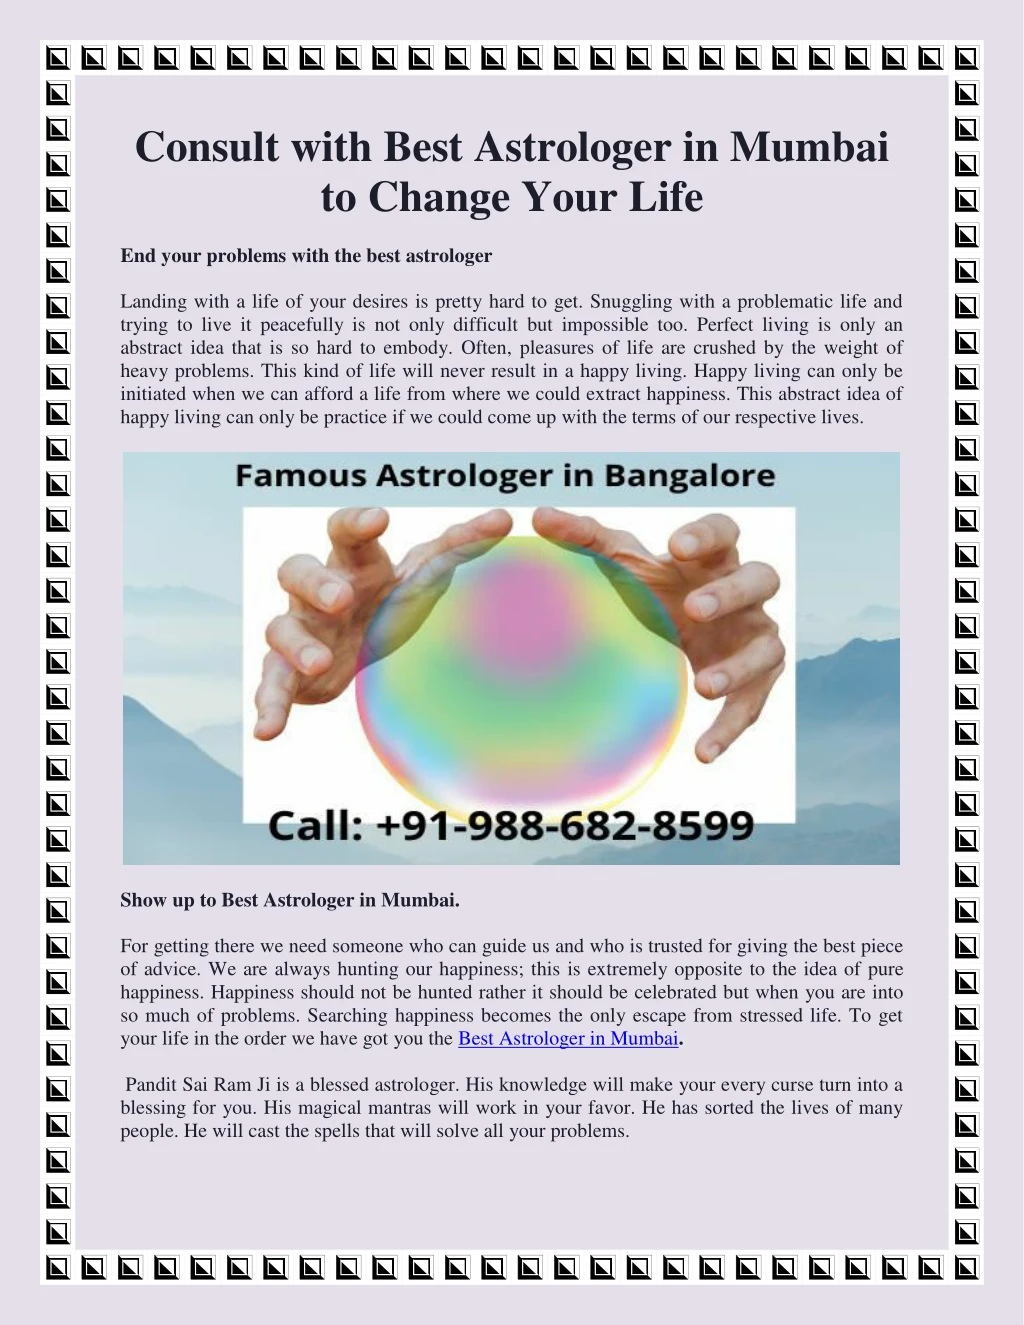 consult with best astrologer in mumbai to change